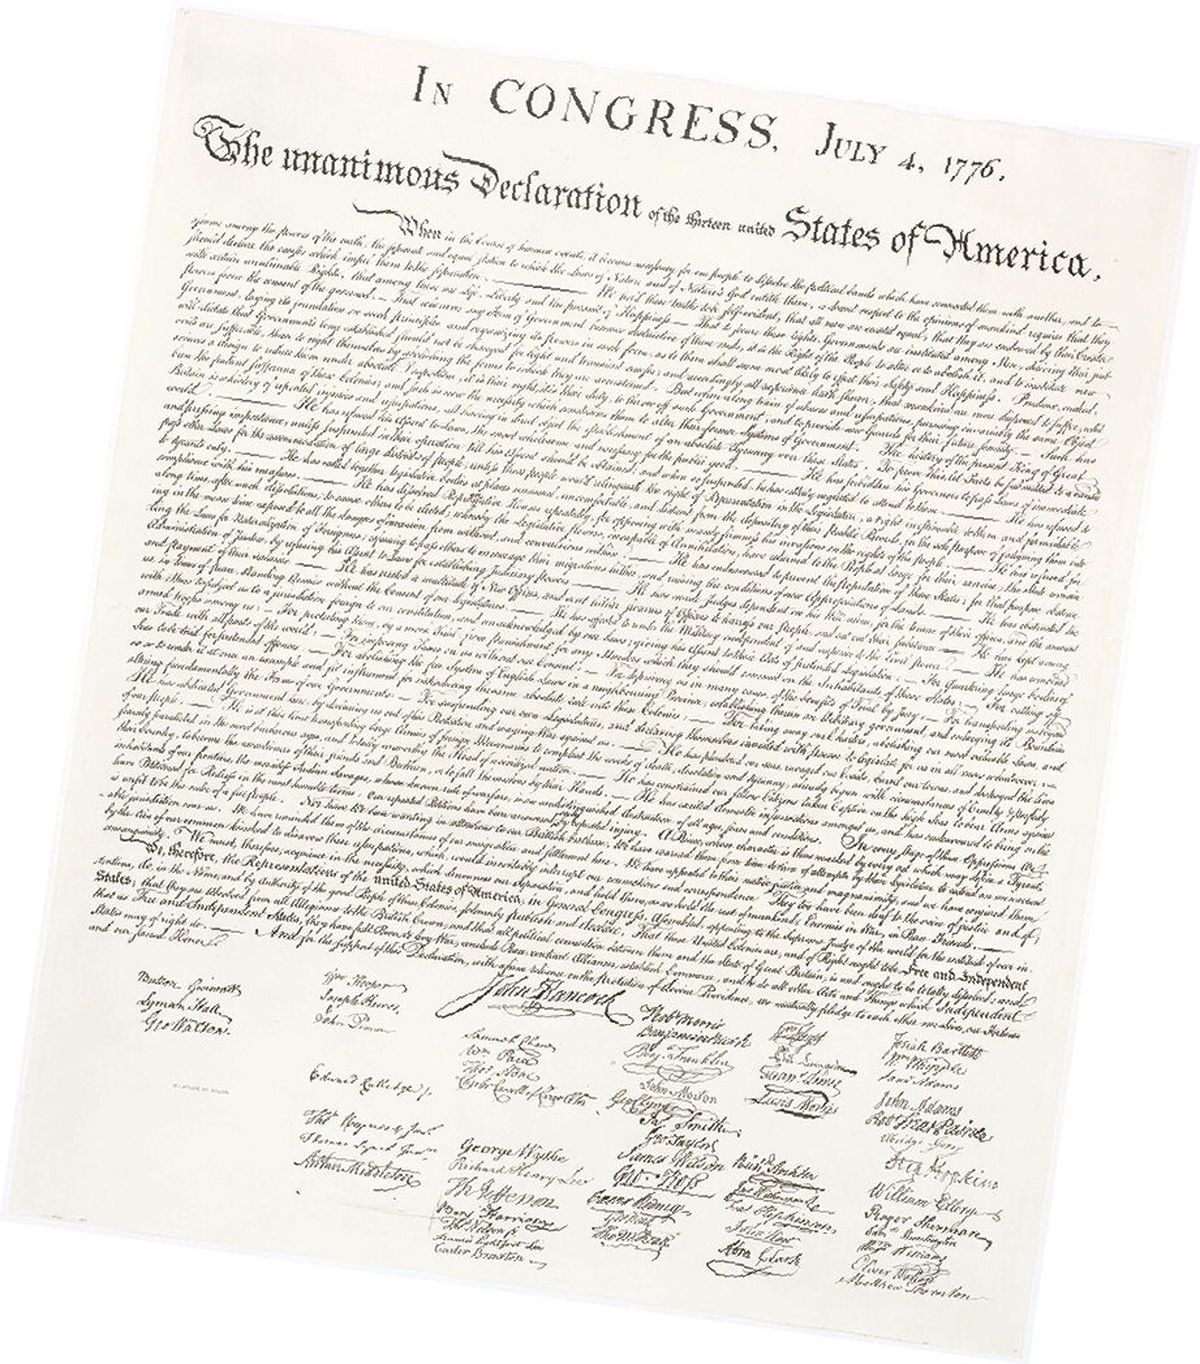 An image of a copy of the Declaration of Independence.  (SSR)